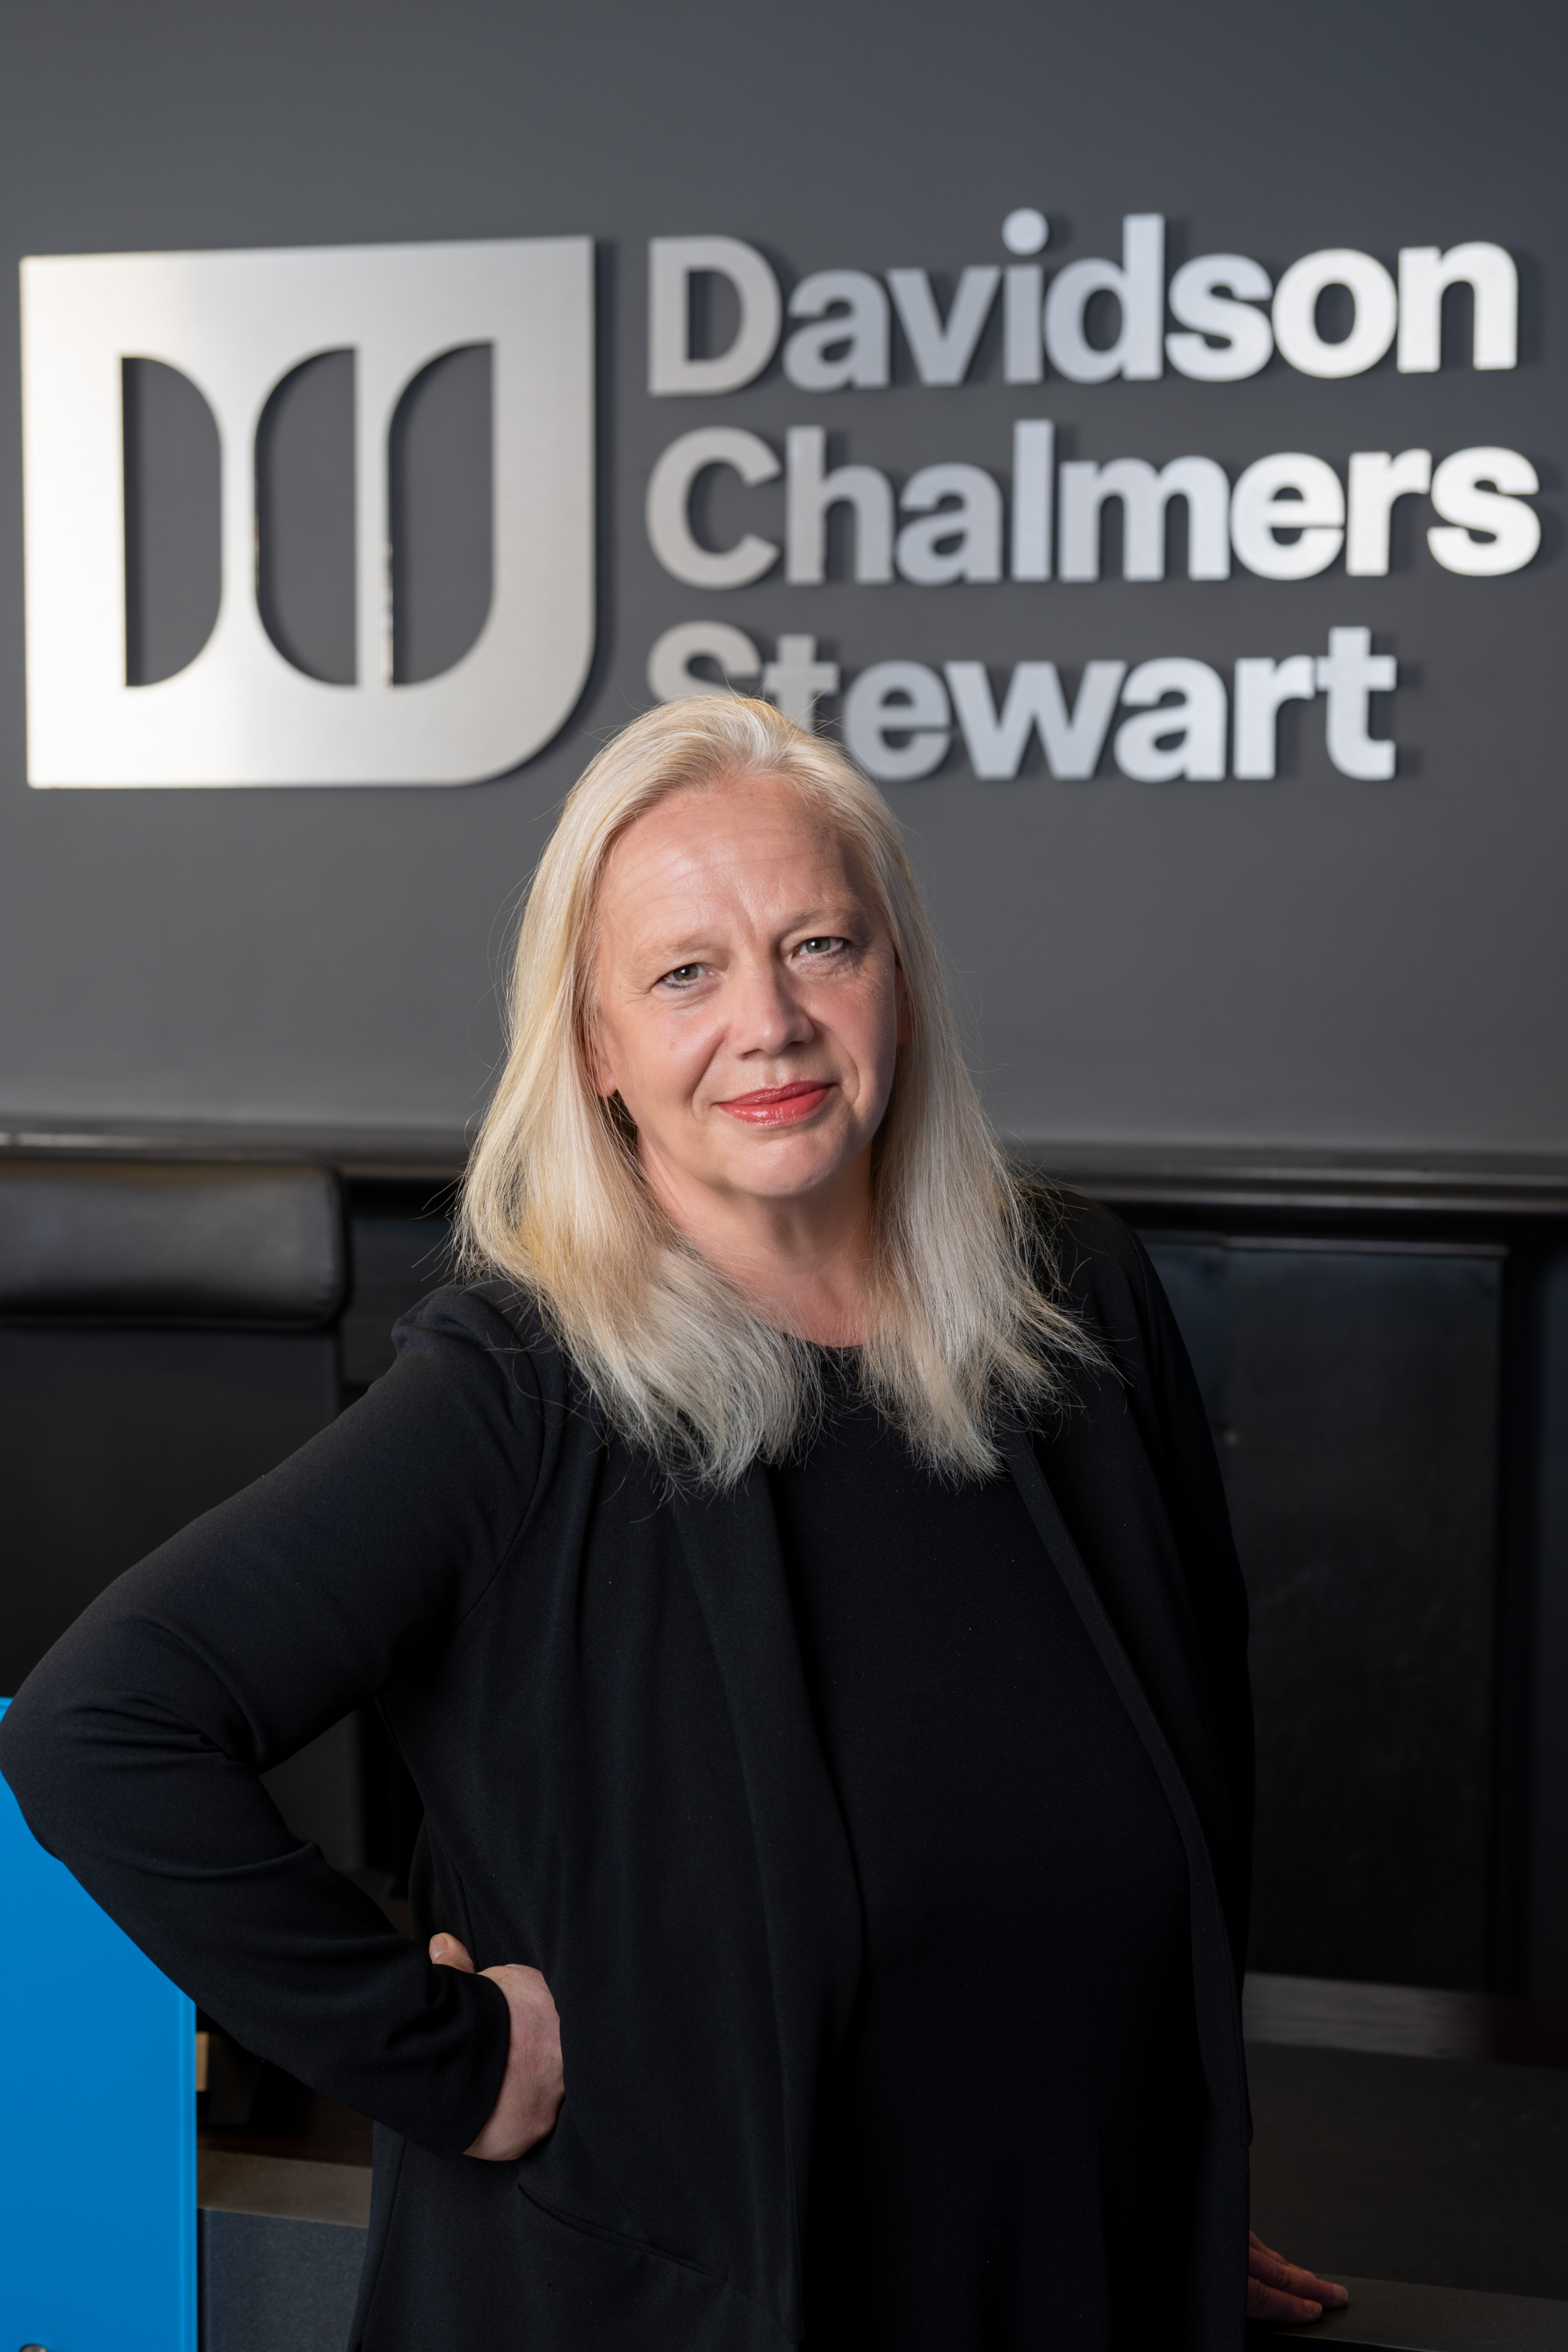 Jane Dickers promoted to partner at Davidson Chalmers Stewart